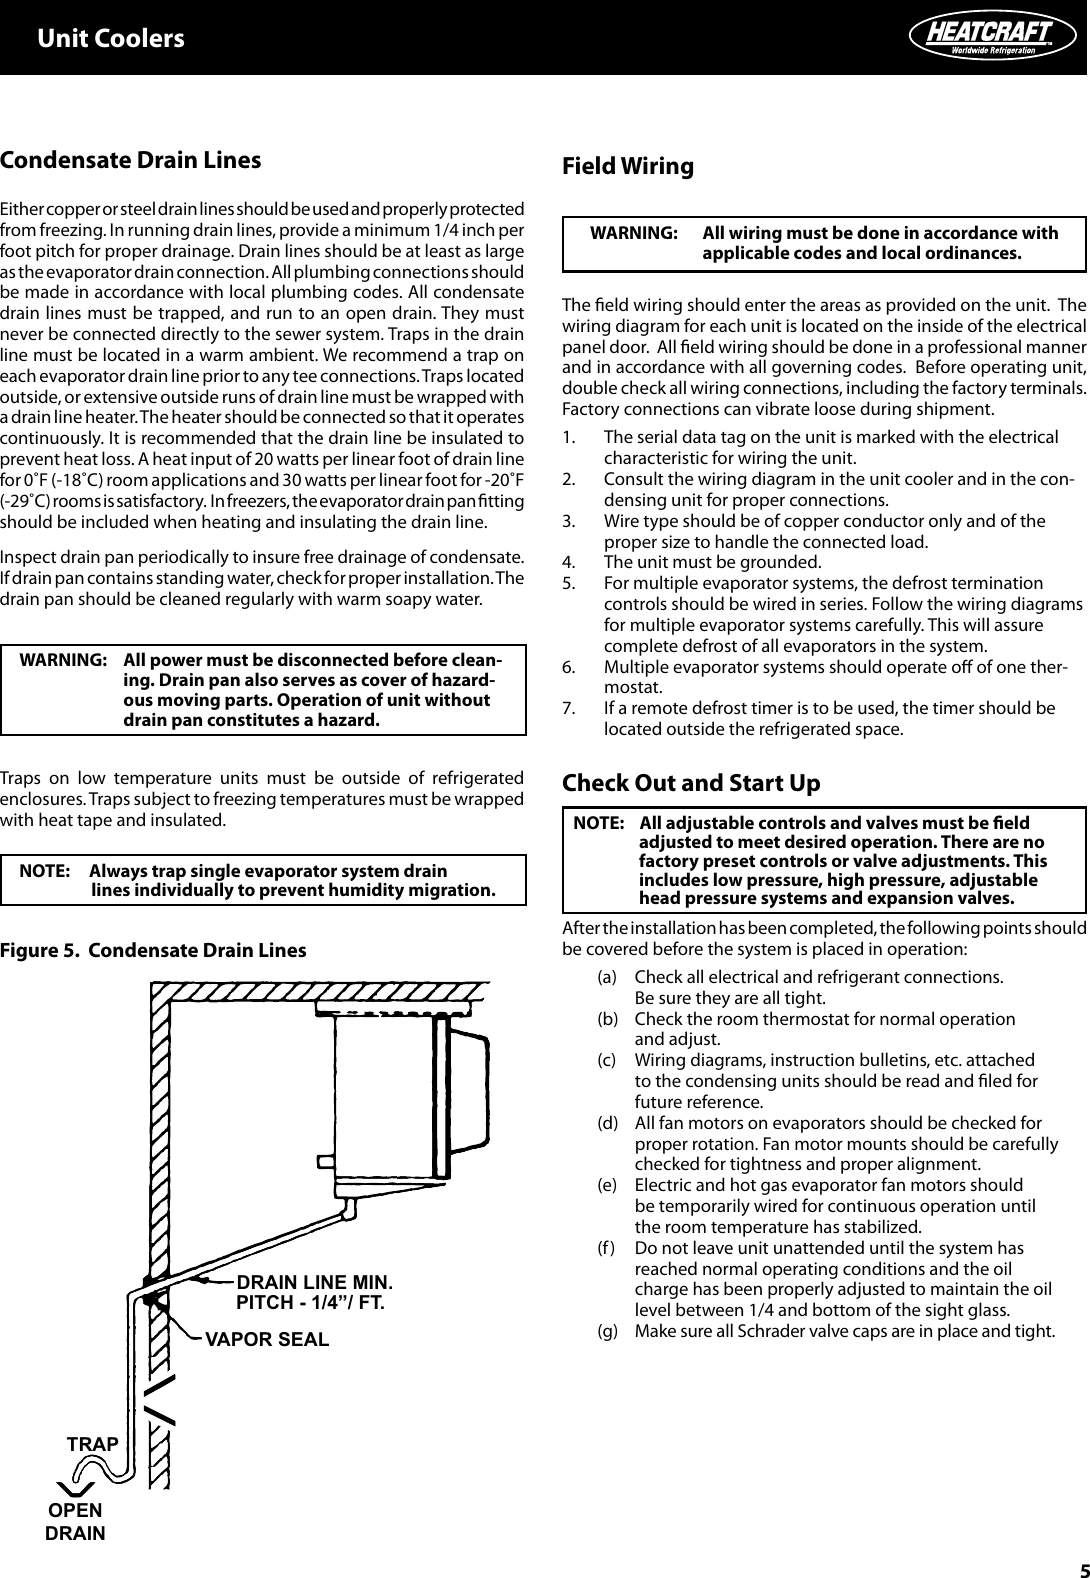 Page 5 of 8 - Heatcraft-Refrigeration-Products Heatcraft-Refrigeration-Products-Unit-Coolers-H-Im-Uc-Users-Manual-  Heatcraft-refrigeration-products-unit-coolers-h-im-uc-users-manual